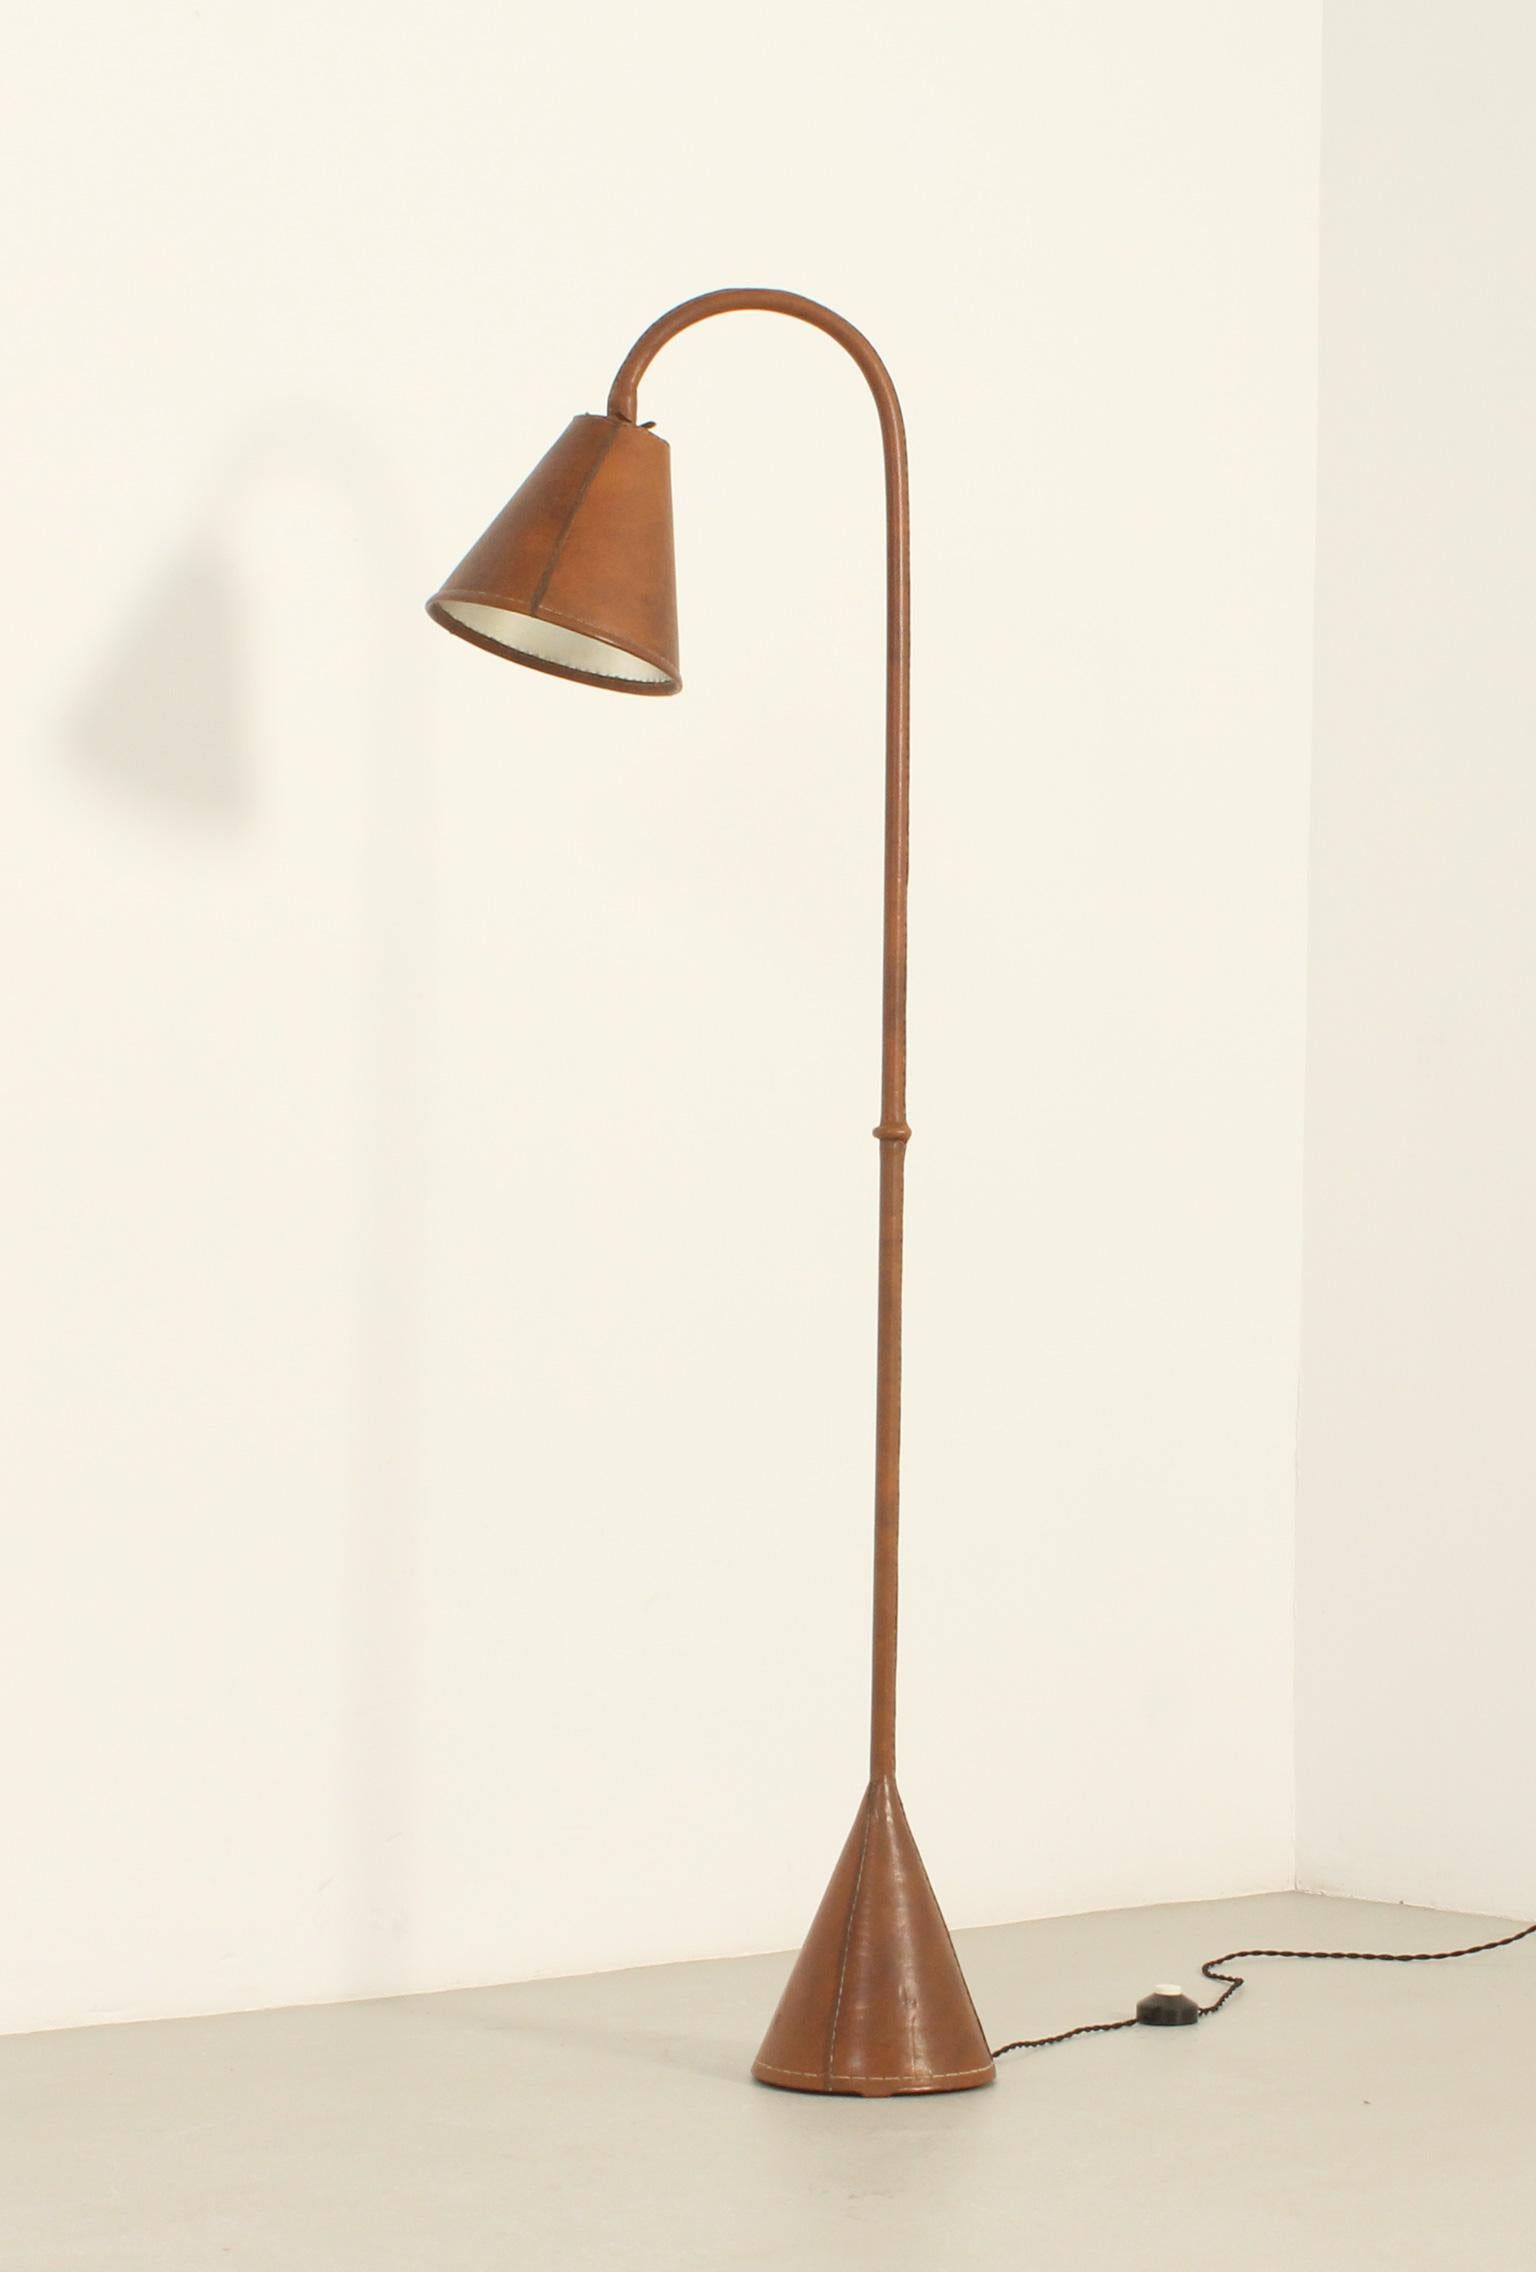 Floor lamp produced in 1950's by Valenti, Spain. Iconic edition in metal and aluminum covered with brown leather with ball joint that allows movement of the shade. 